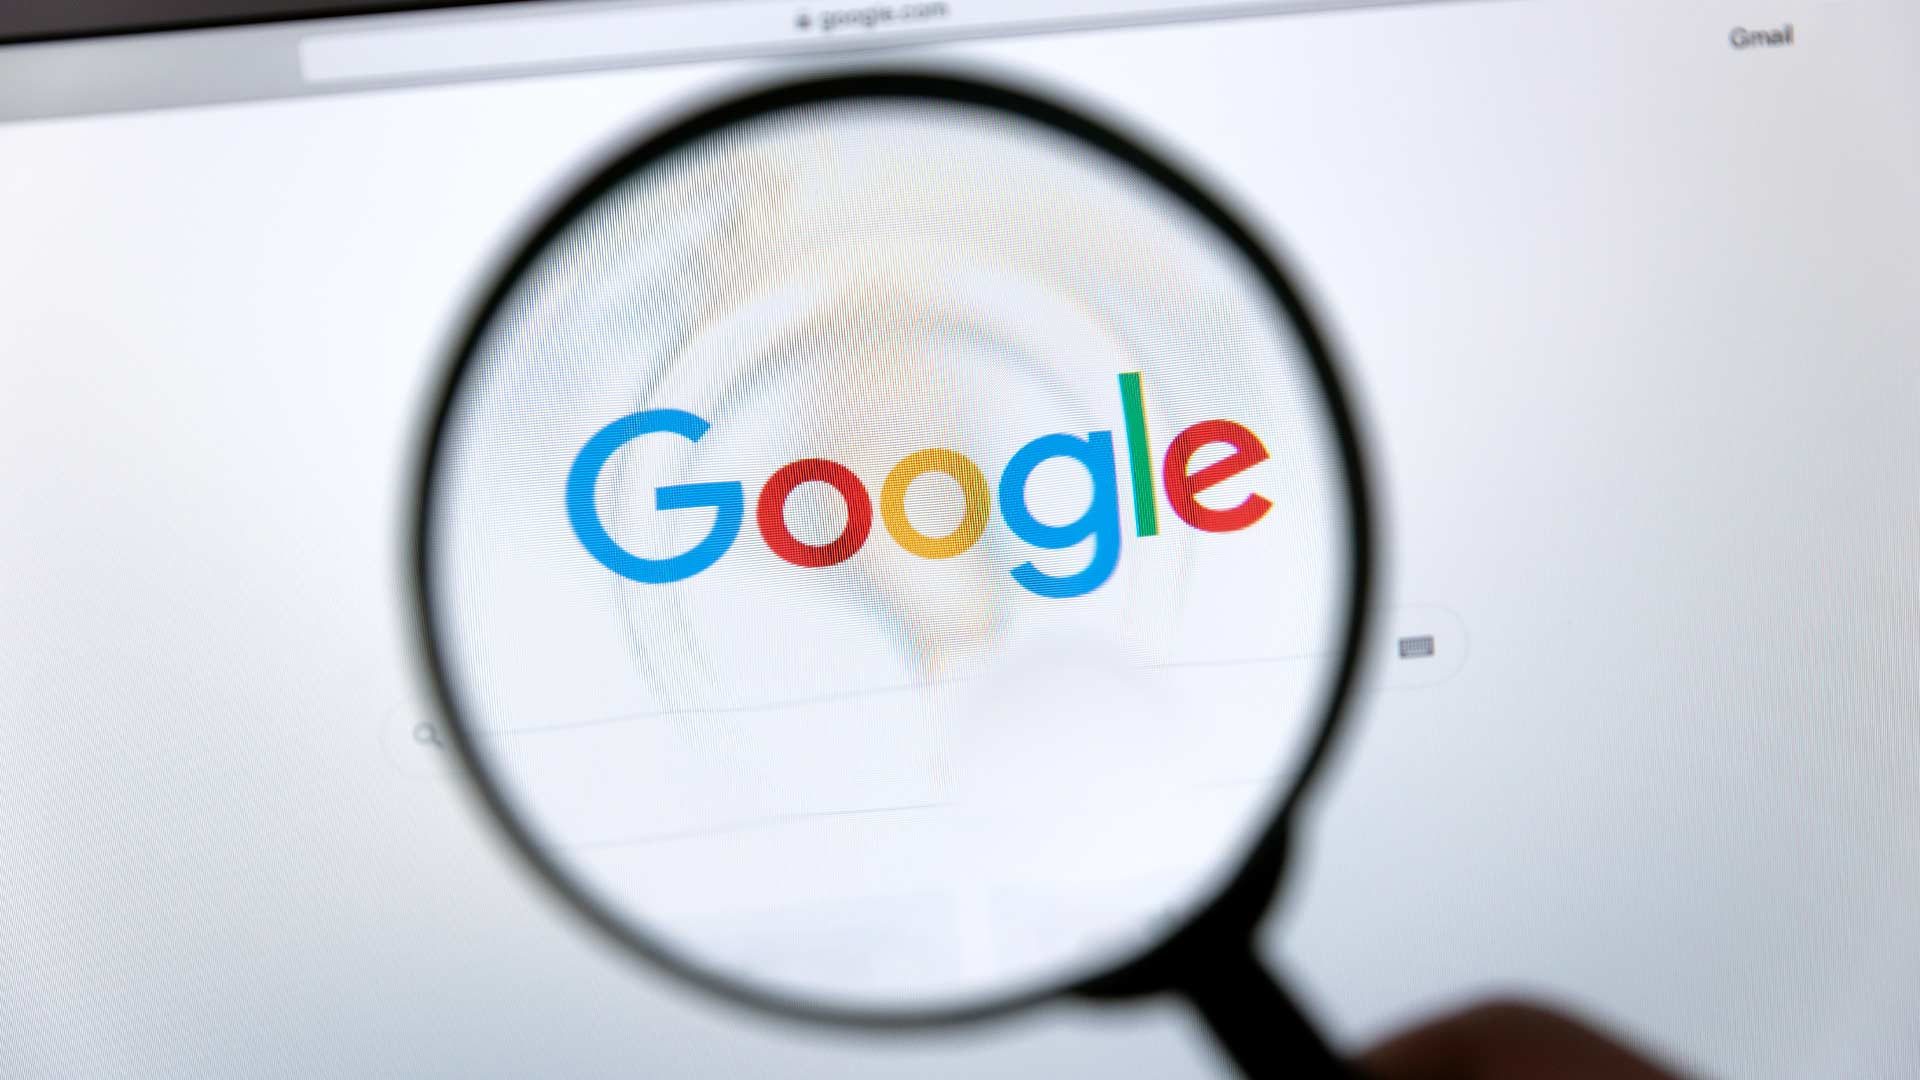 How To Use Google Search Effectively